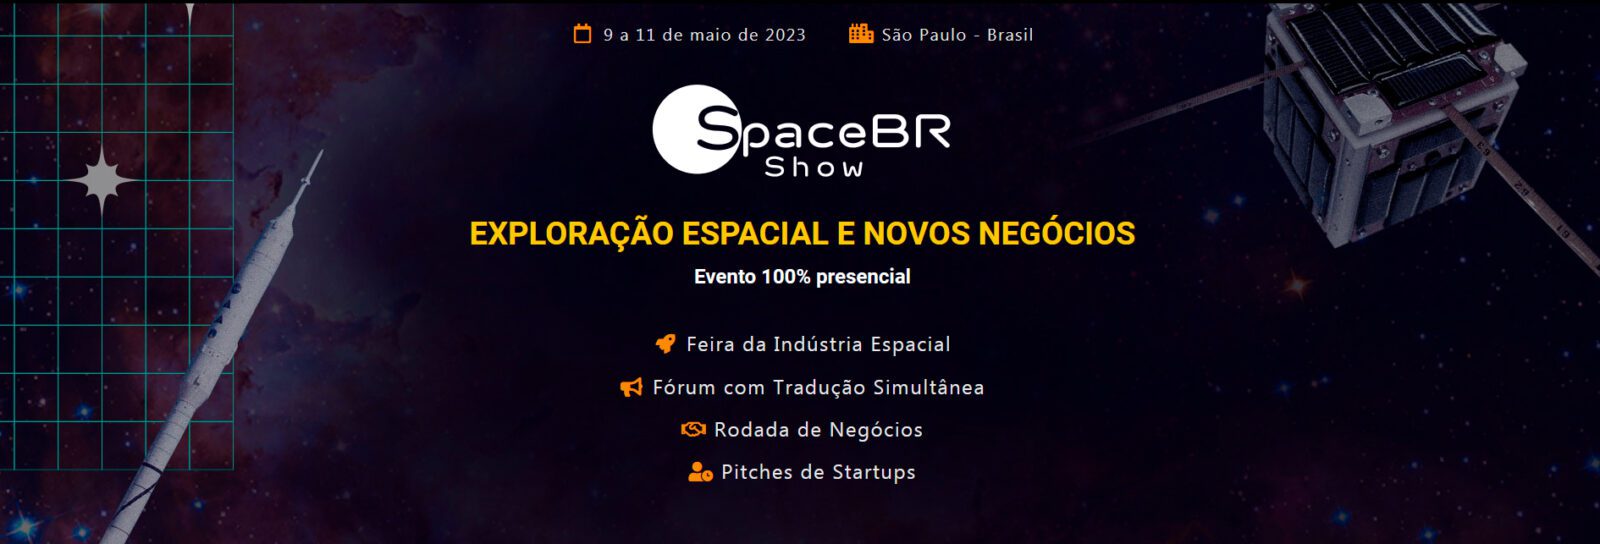 SpaceBR Show 2023 debates the participation of Brazil in the new space race